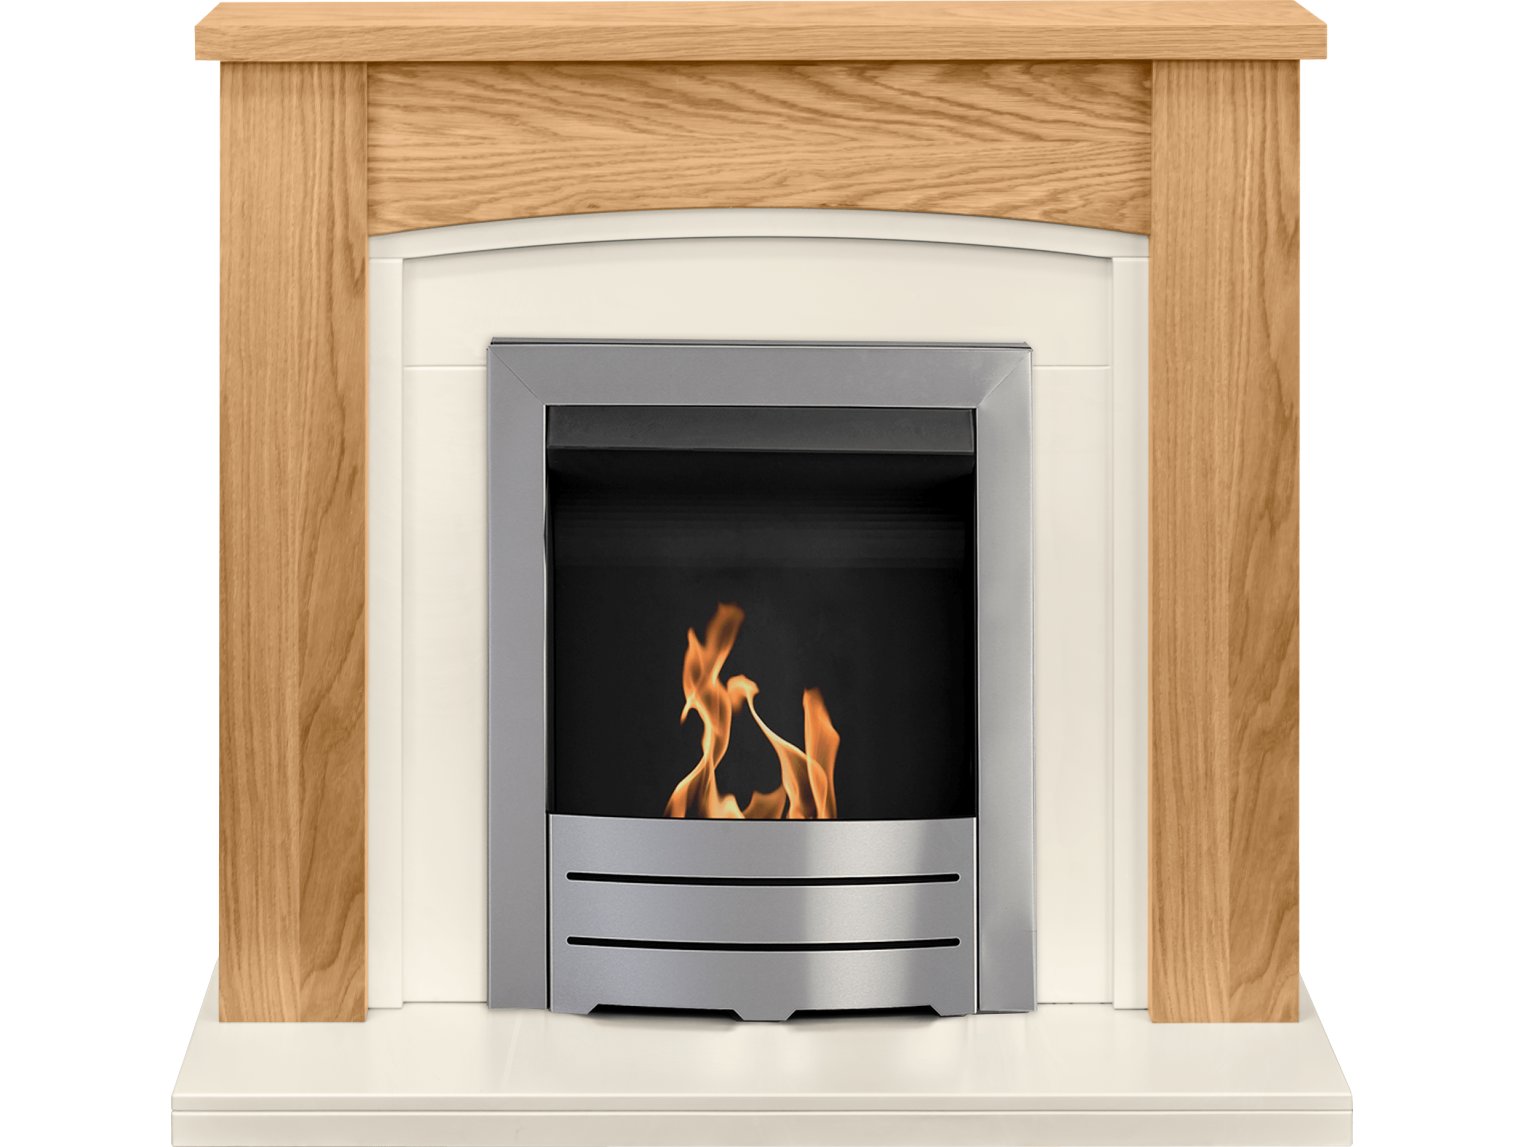 Adam Chilton Fireplace Suite in Oak with Colorado Bio Ethanol Fire in Brushed Steel, 39 Inch